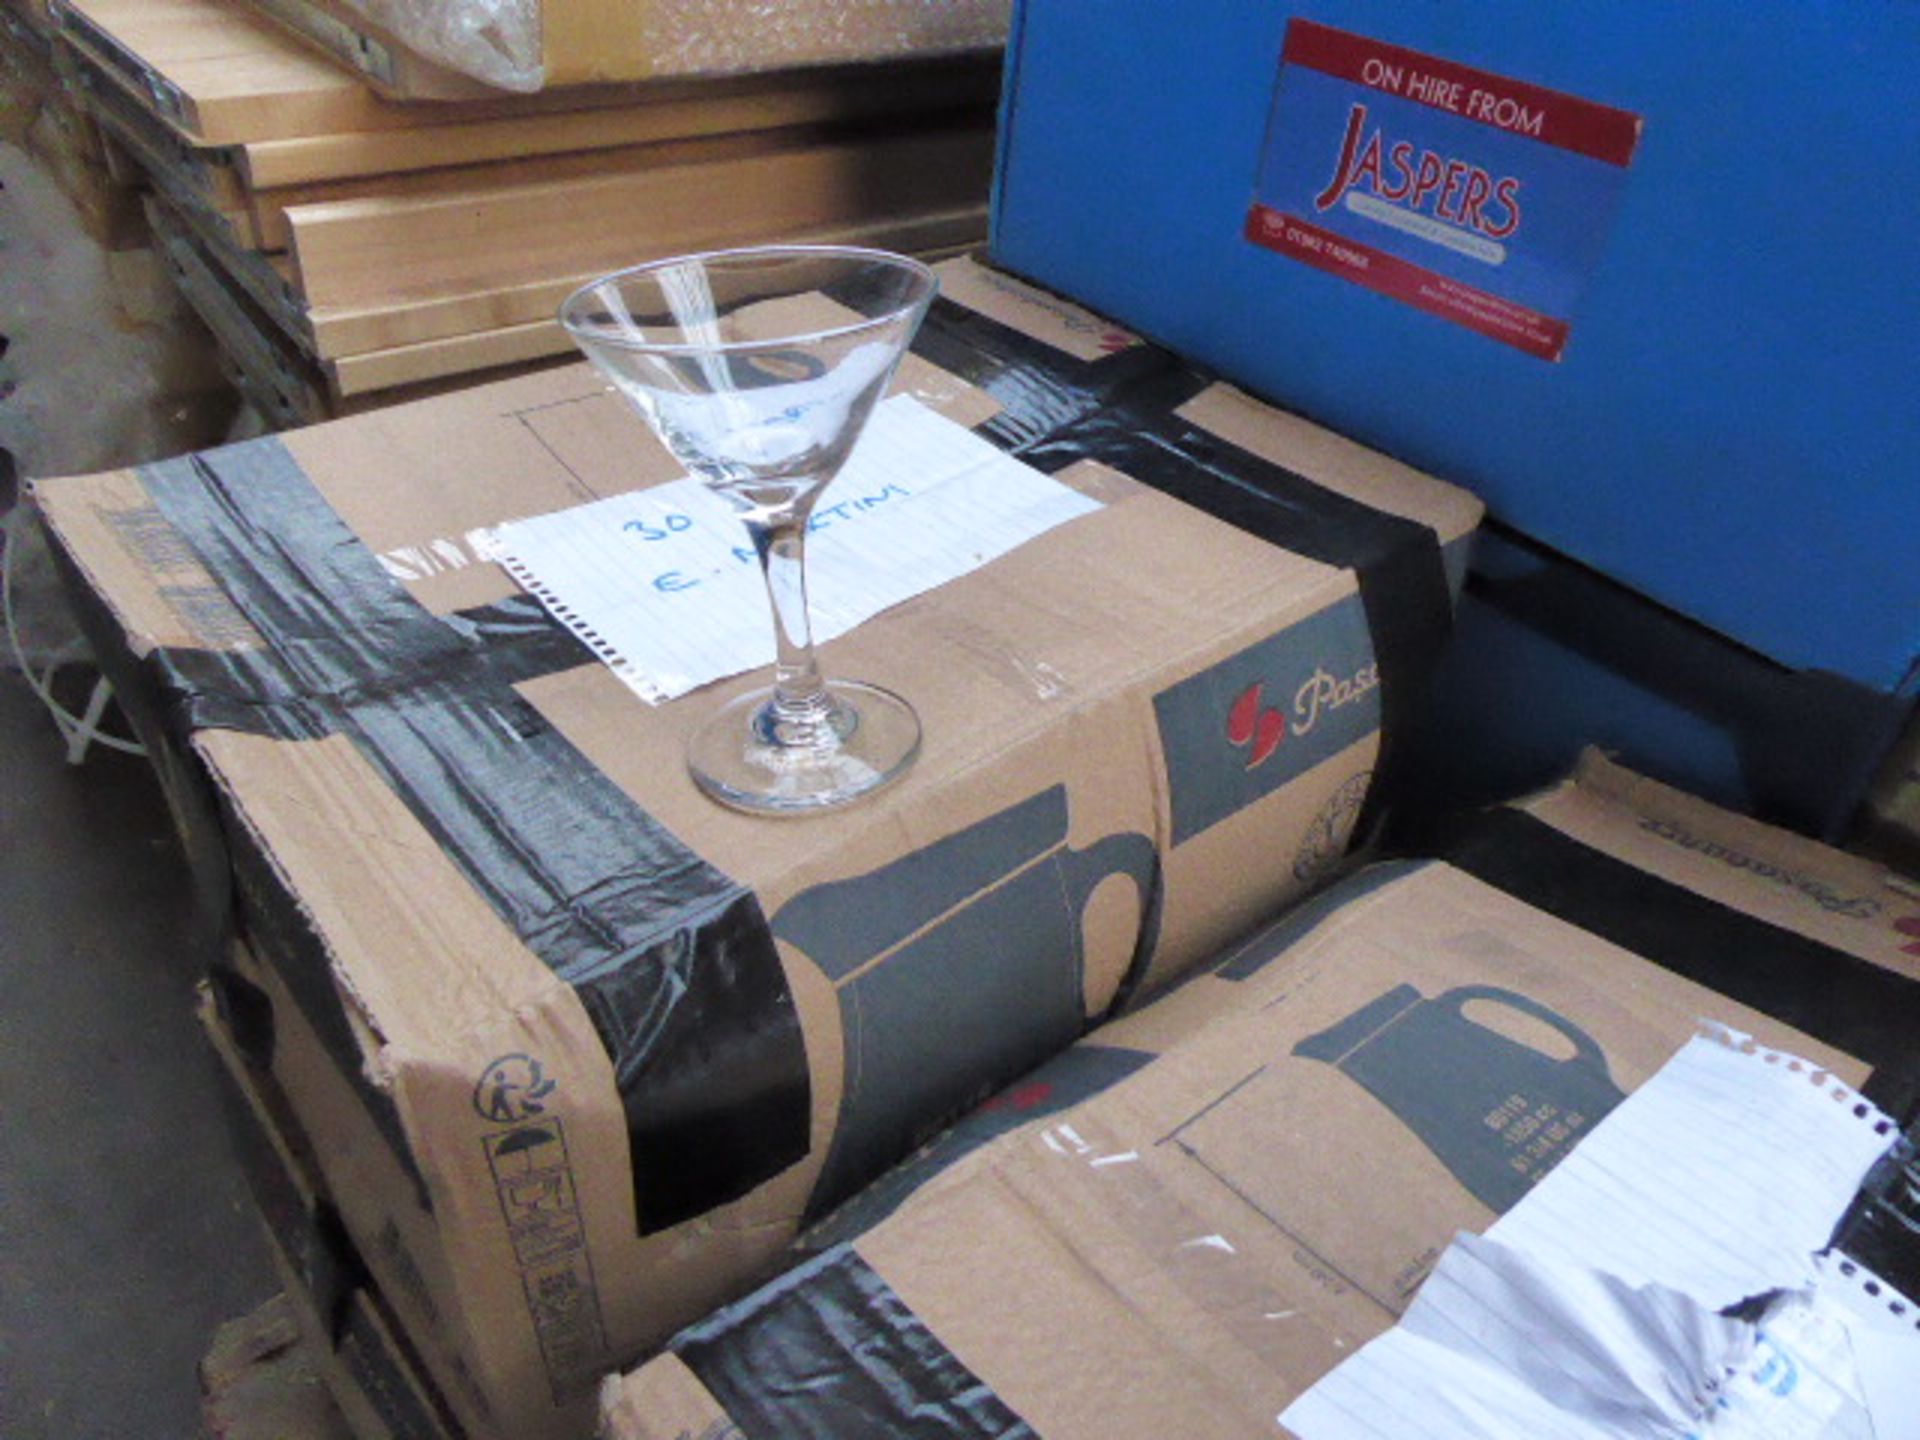 Five boxes of approx. 30 martini glasses